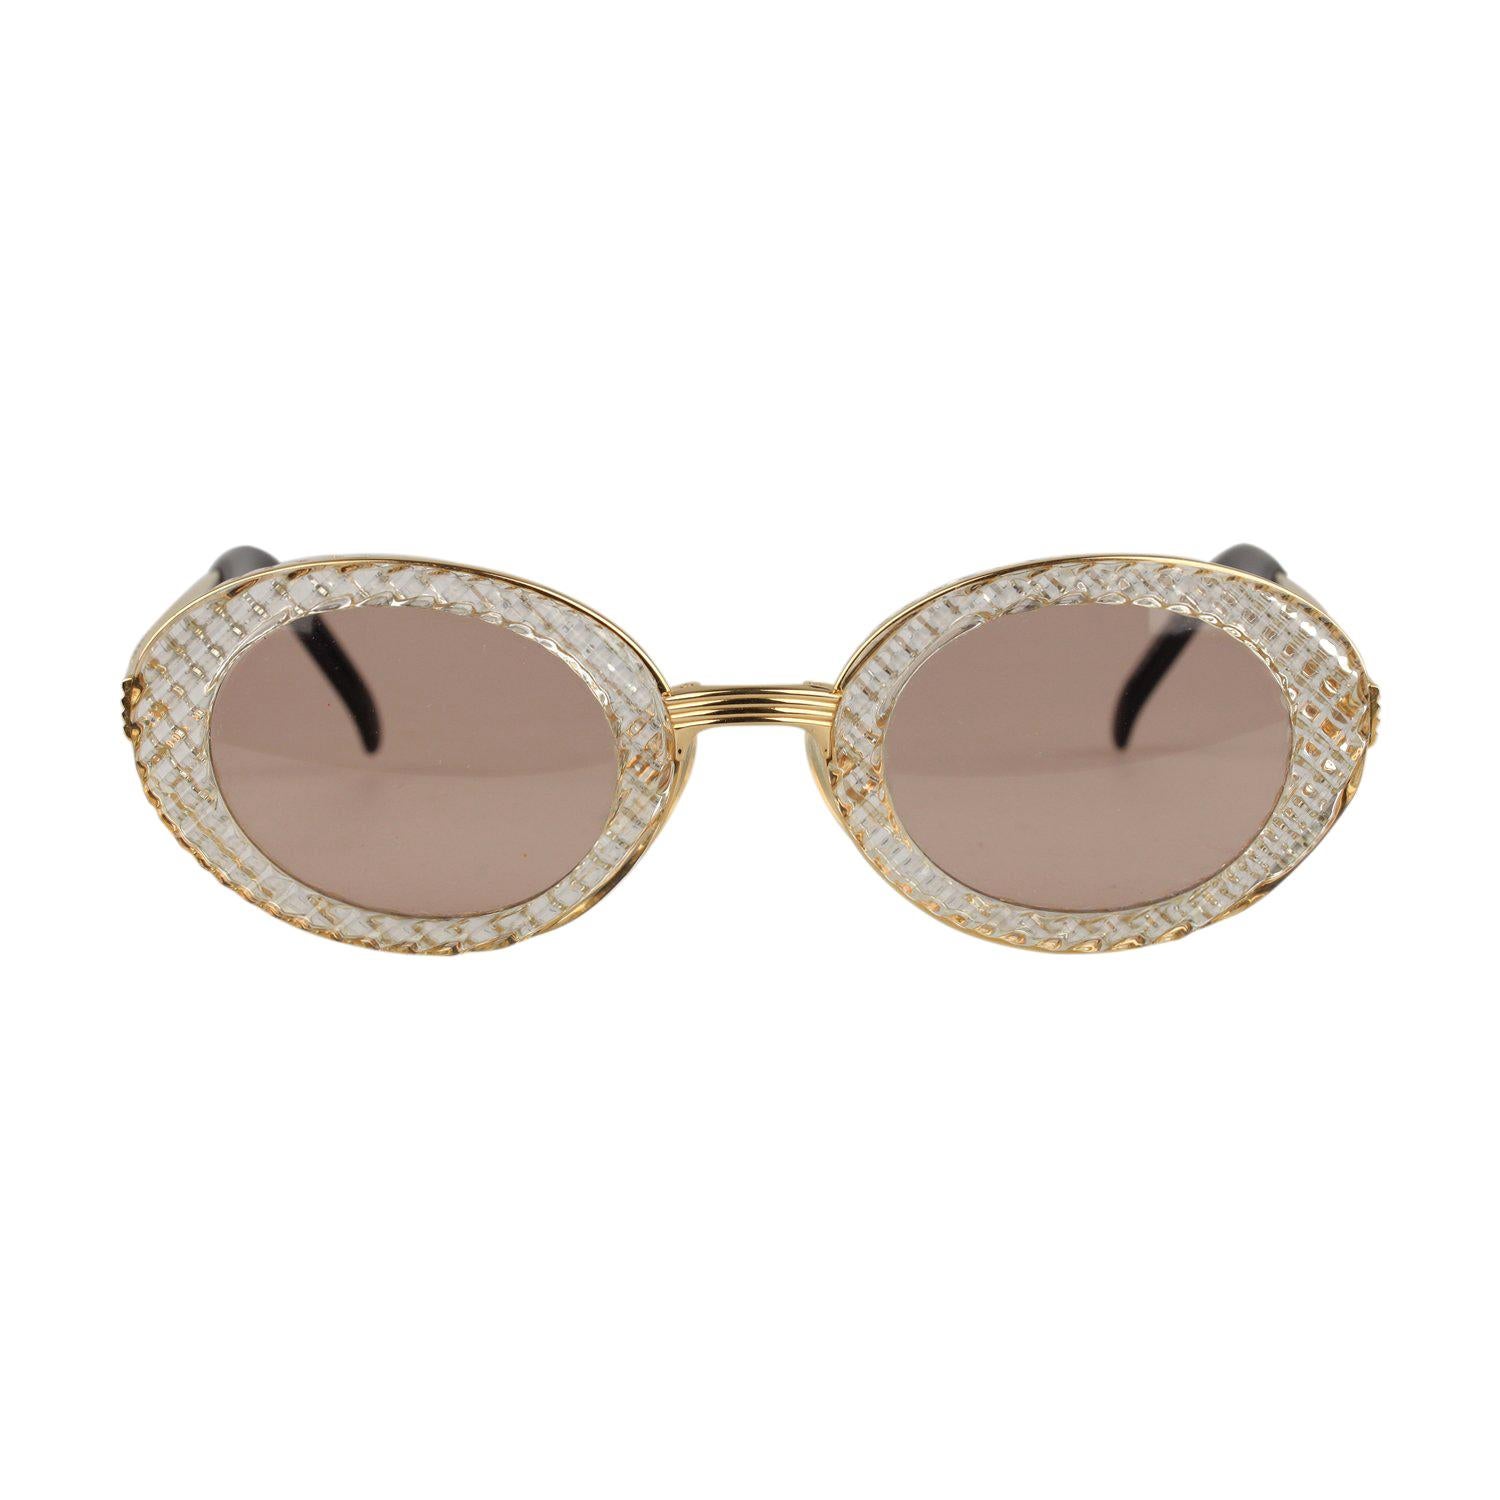 Jean Paul Gaultier Vintage Gold Oval Sunglasses 56-5201 New Old Stock ...